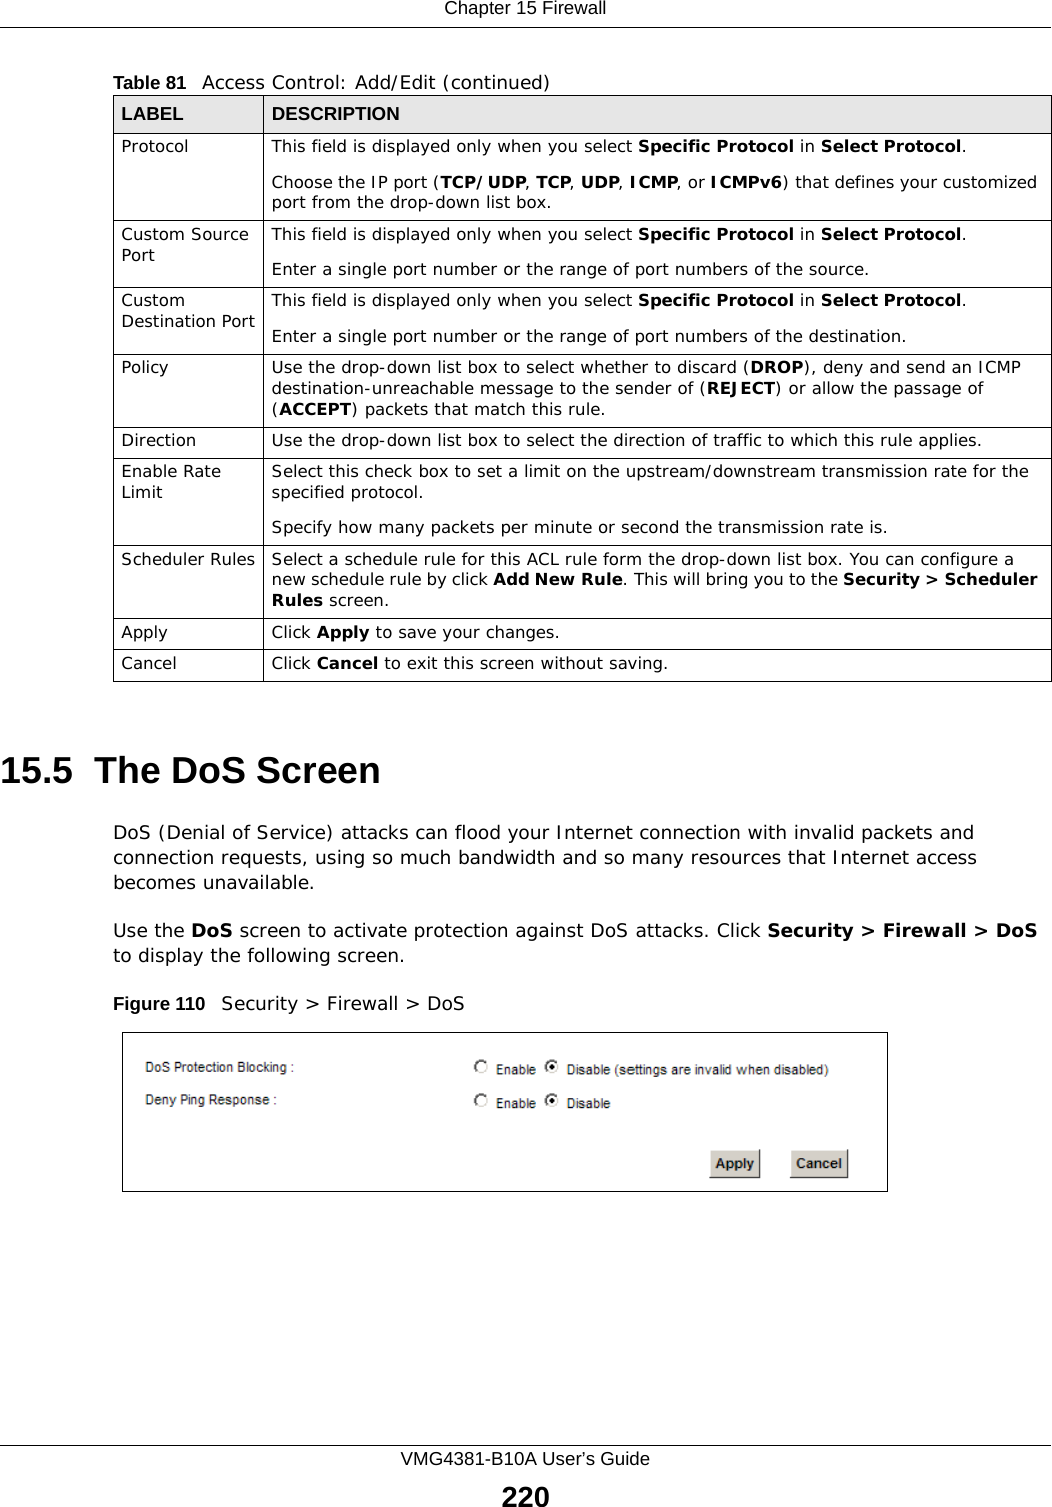 Chapter 15 FirewallVMG4381-B10A User’s Guide22015.5  The DoS ScreenDoS (Denial of Service) attacks can flood your Internet connection with invalid packets and connection requests, using so much bandwidth and so many resources that Internet access becomes unavailable. Use the DoS screen to activate protection against DoS attacks. Click Security &gt; Firewall &gt; DoS to display the following screen. Figure 110   Security &gt; Firewall &gt; DoSProtocol This field is displayed only when you select Specific Protocol in Select Protocol.Choose the IP port (TCP/UDP, TCP, UDP, ICMP, or ICMPv6) that defines your customized port from the drop-down list box.Custom Source Port This field is displayed only when you select Specific Protocol in Select Protocol.Enter a single port number or the range of port numbers of the source.Custom Destination Port This field is displayed only when you select Specific Protocol in Select Protocol.Enter a single port number or the range of port numbers of the destination.Policy Use the drop-down list box to select whether to discard (DROP), deny and send an ICMP destination-unreachable message to the sender of (REJECT) or allow the passage of (ACCEPT) packets that match this rule.Direction  Use the drop-down list box to select the direction of traffic to which this rule applies.Enable Rate Limit Select this check box to set a limit on the upstream/downstream transmission rate for the specified protocol.Specify how many packets per minute or second the transmission rate is.Scheduler Rules Select a schedule rule for this ACL rule form the drop-down list box. You can configure a new schedule rule by click Add New Rule. This will bring you to the Security &gt; Scheduler Rules screen.Apply Click Apply to save your changes.Cancel Click Cancel to exit this screen without saving.Table 81   Access Control: Add/Edit (continued)LABEL DESCRIPTION